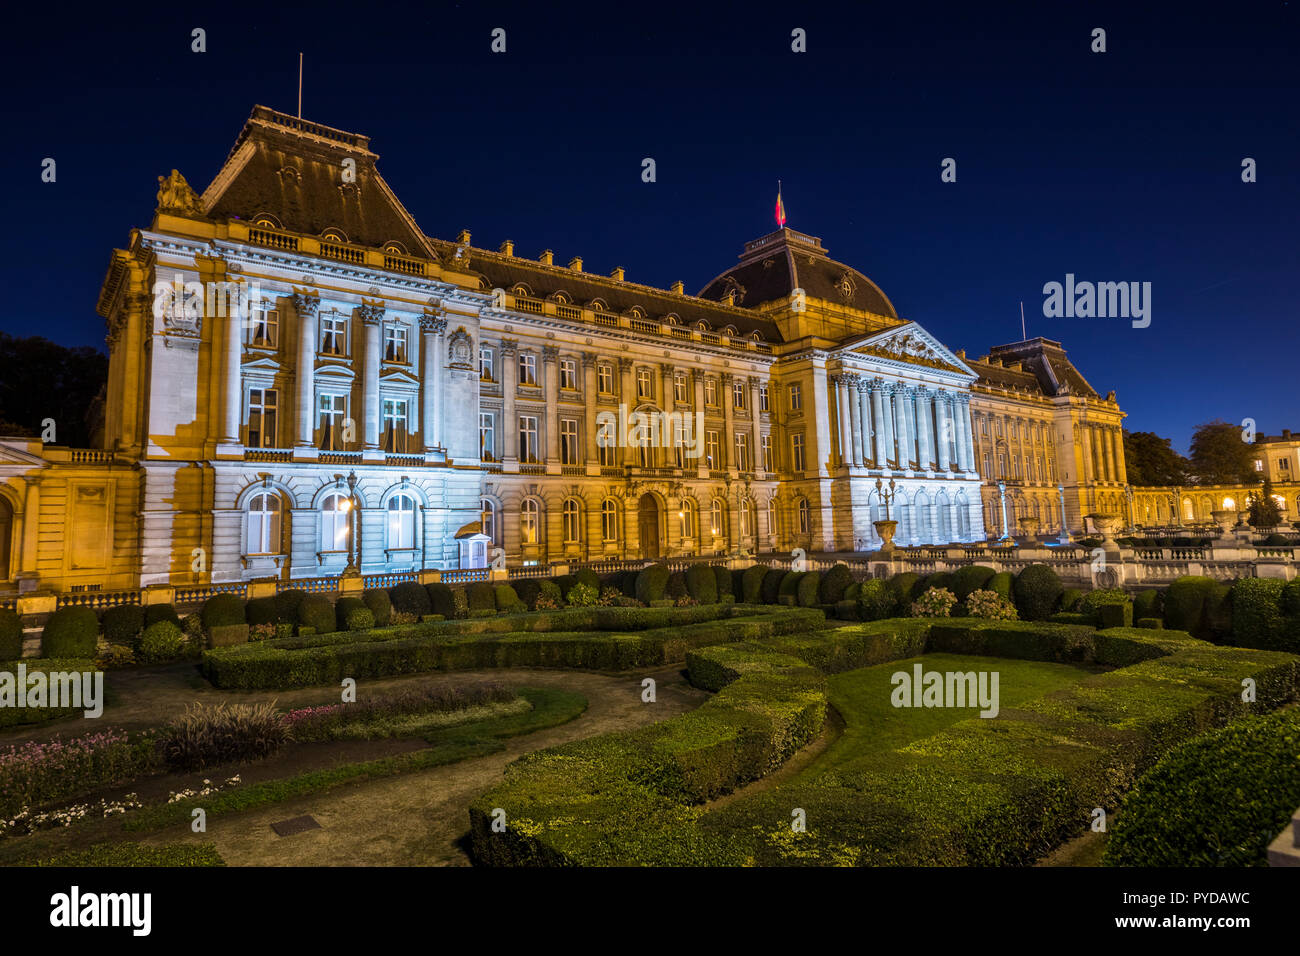 Royal Palace of Brussels at night Stock Photo